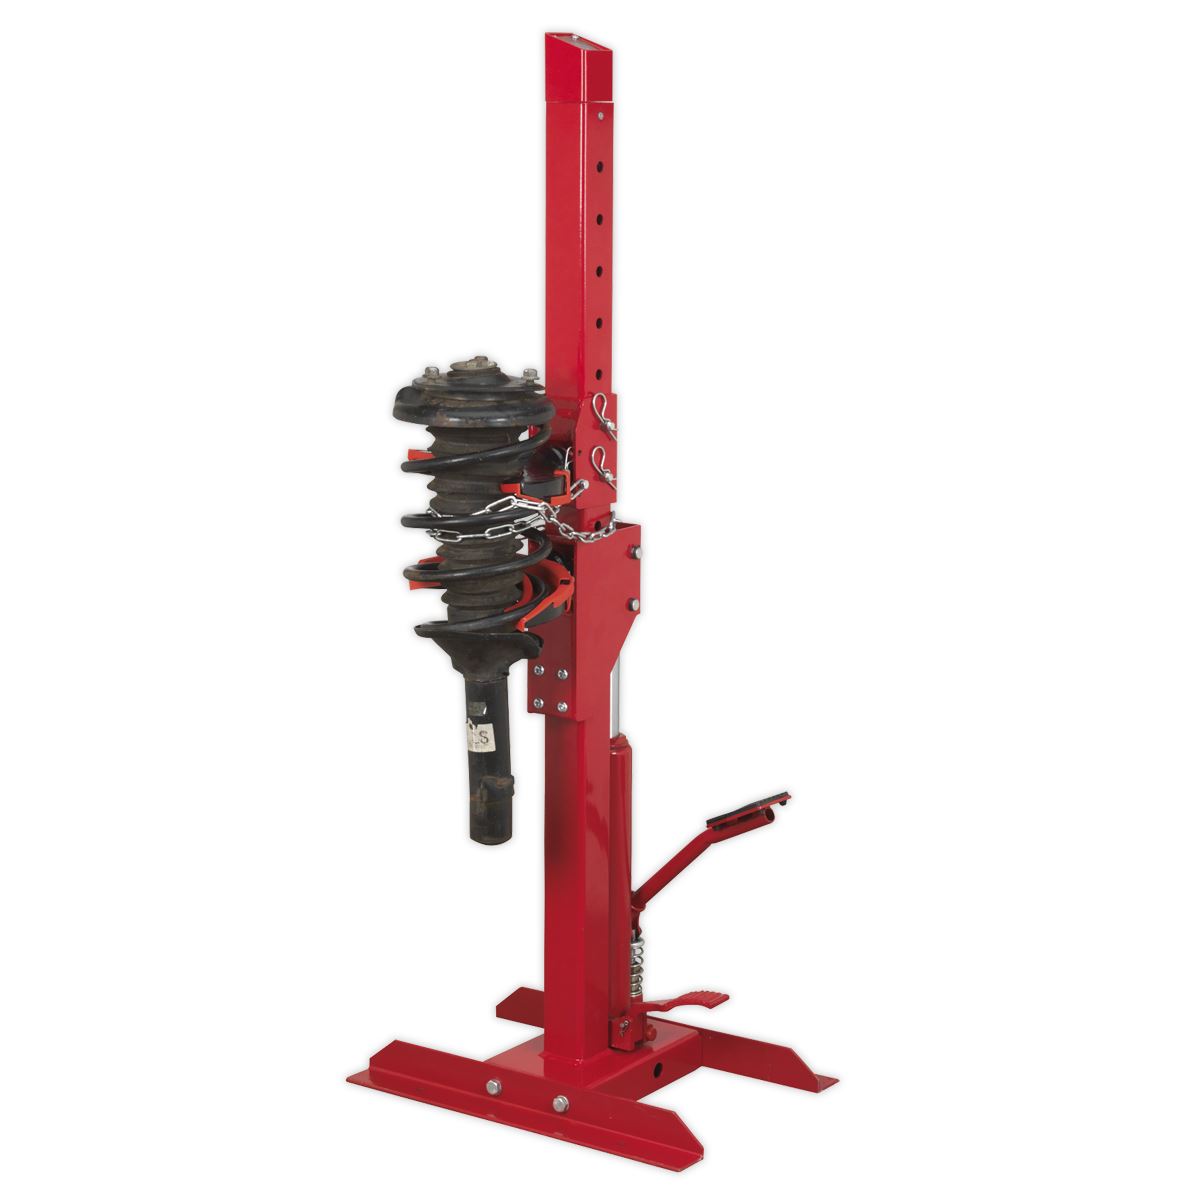 Sealey Coil Spring Compressing Station with Gauge Hydraulic 2000kg Capacity